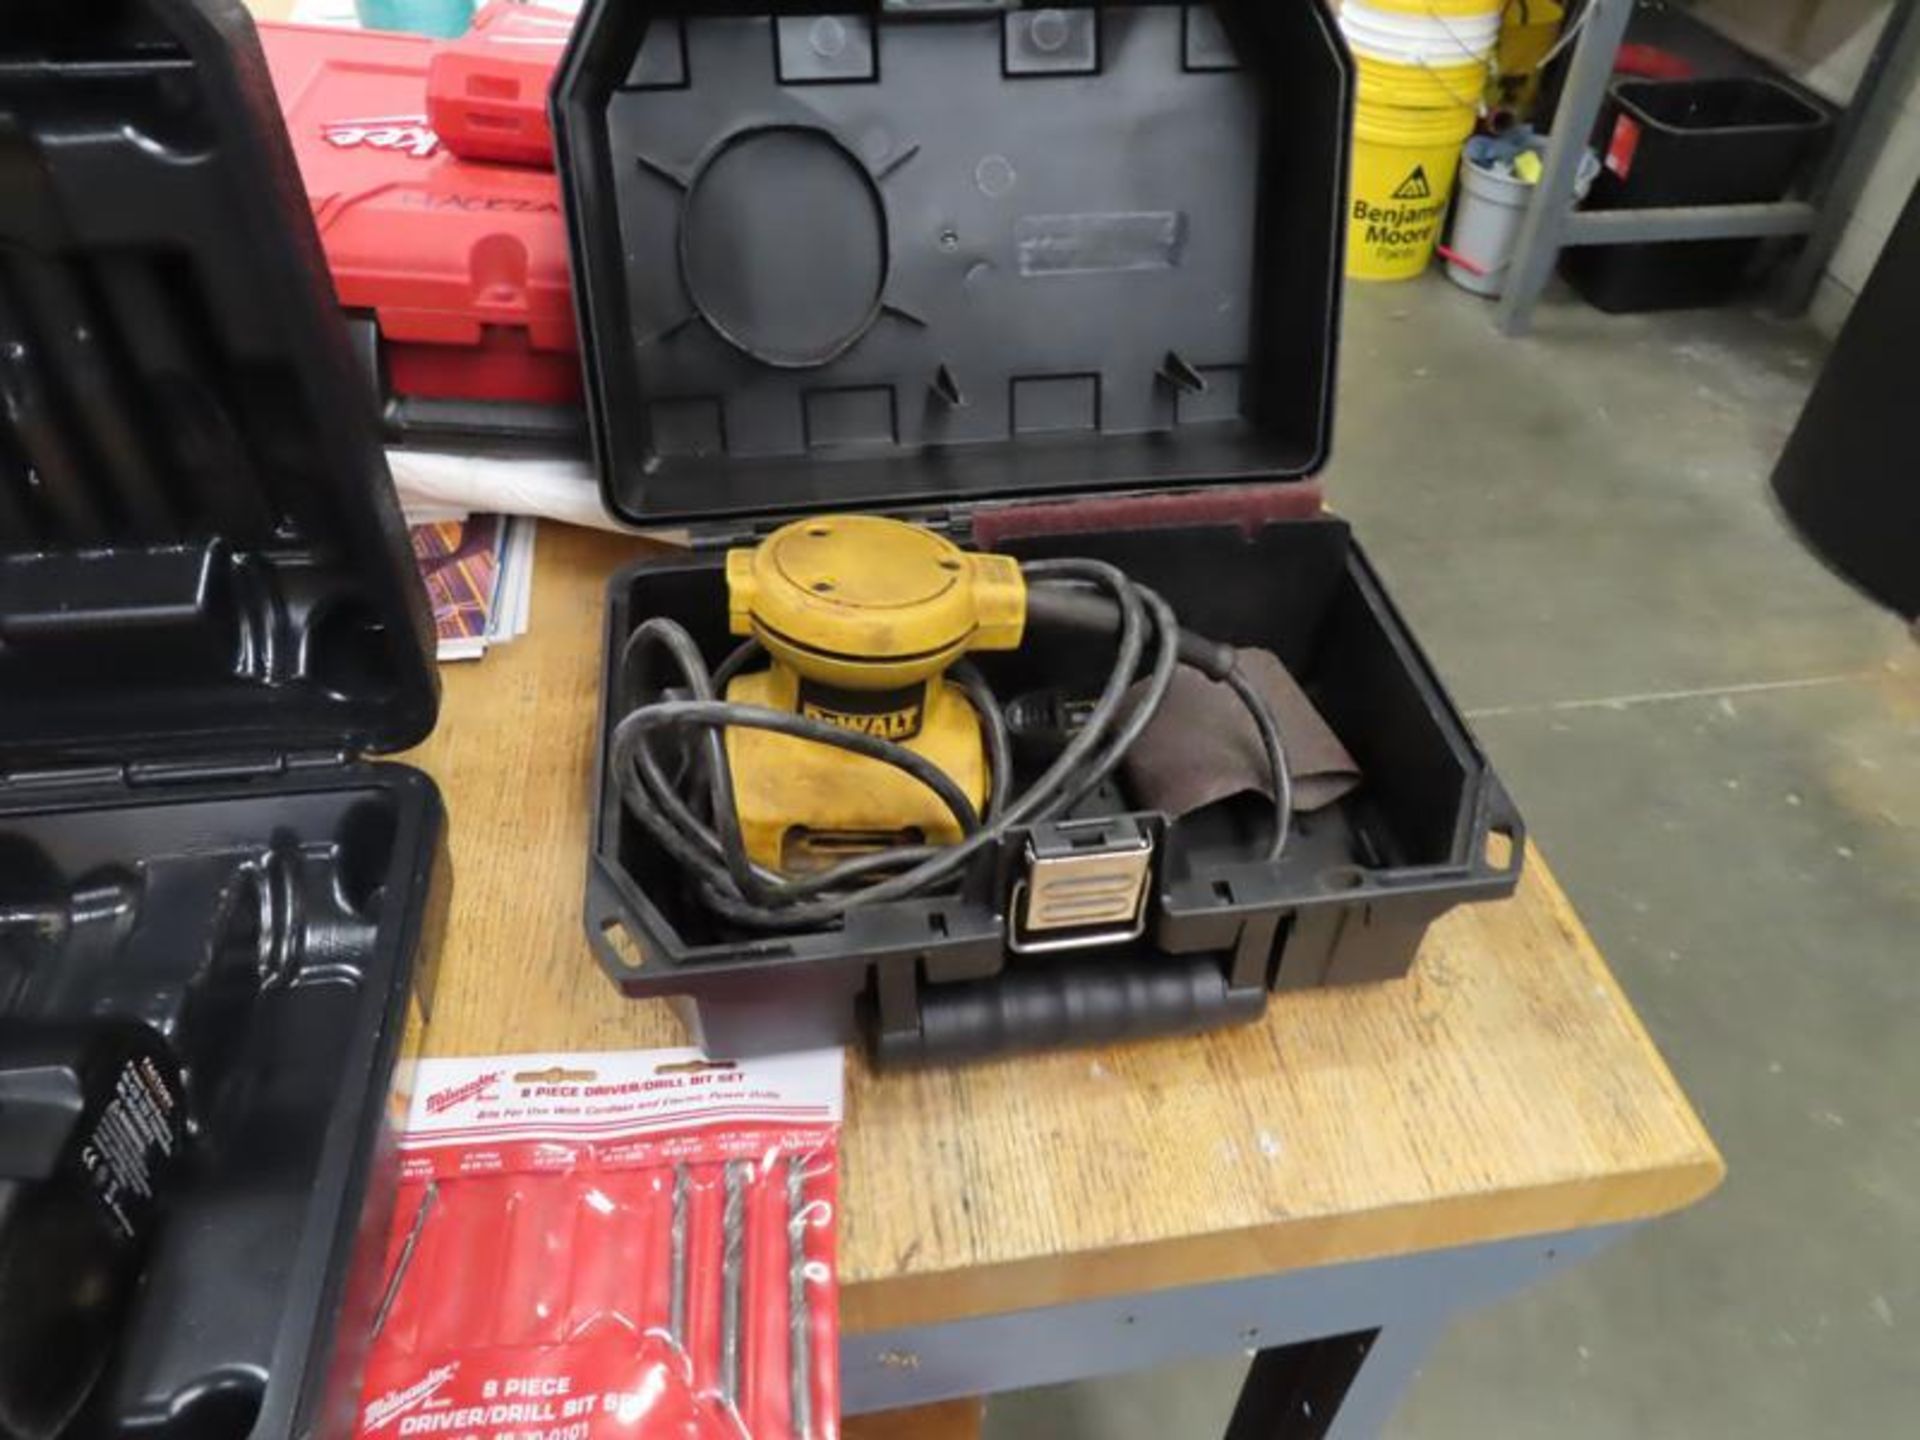 Two Work Benches and contents including pancake air compressor, DeWalt Drill, Drill Doctor Bit Sharp - Image 4 of 6